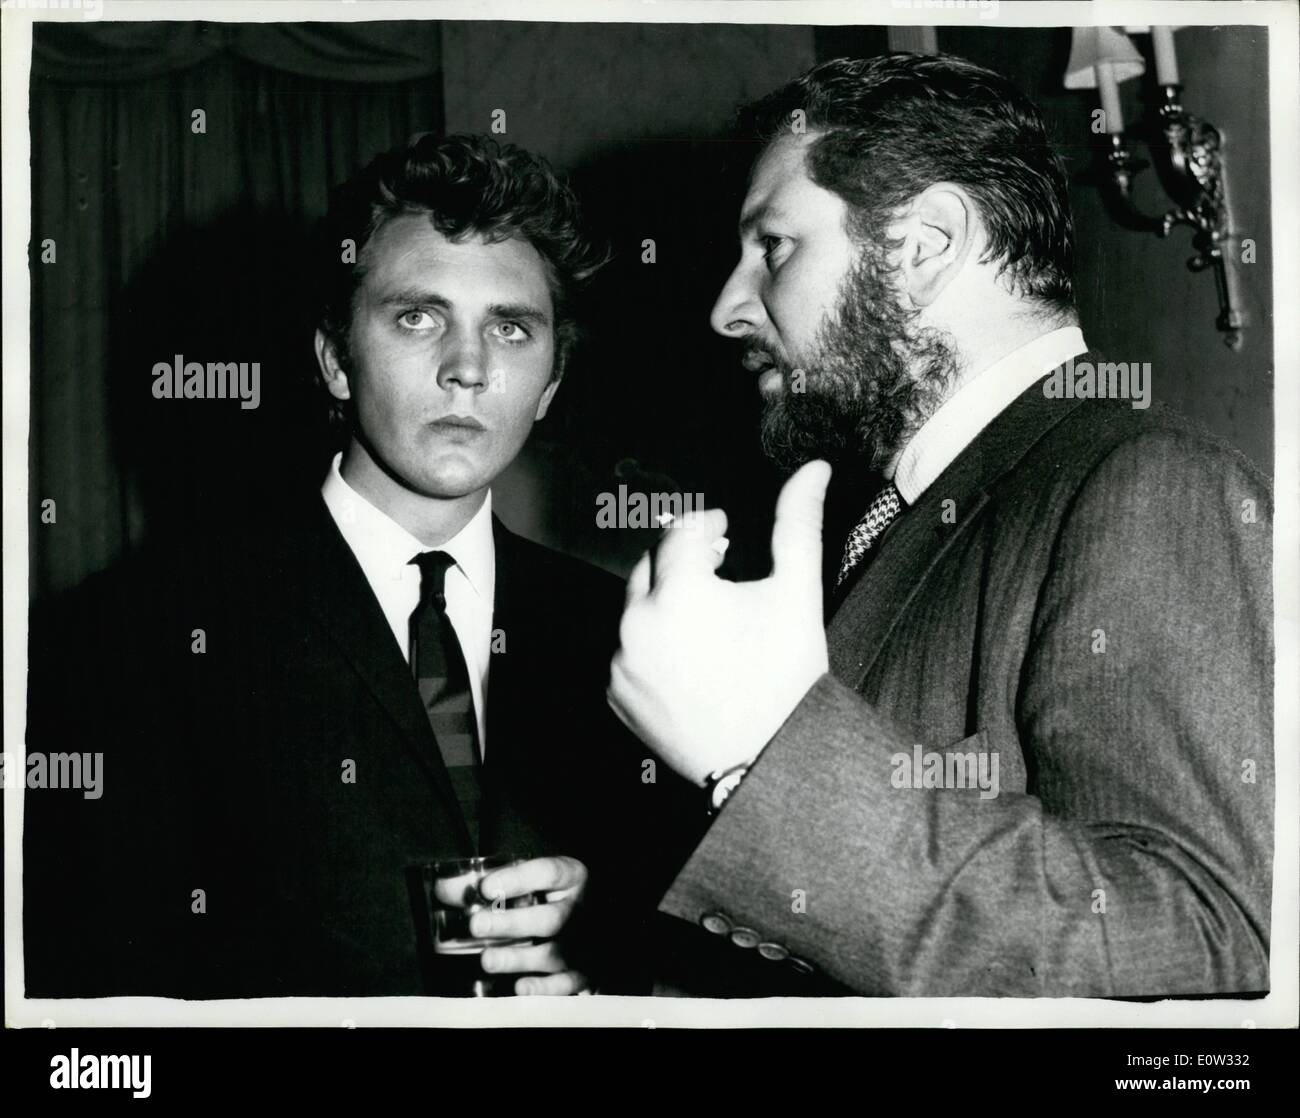 May 05, 1961 - Reception for stars of ''Billy Budd''. A reception was held this evening at the River Restaurant, Savoy Hotel, to meet Peter Ustinov and Hollywood star Robert Ryan who are to star in the new film ''Billy Budd'', location shooting for which commences in Alicante, Spain, on June 1st. Other members of the cast were present. Keystone picture shows: Peter Ustinov pictured at this evening's reception, with Terence Stamp, an unknown 21 years old actor from Plaistow, London, who plays the role of ''Billy Budd'' in the new film, Stock Photo